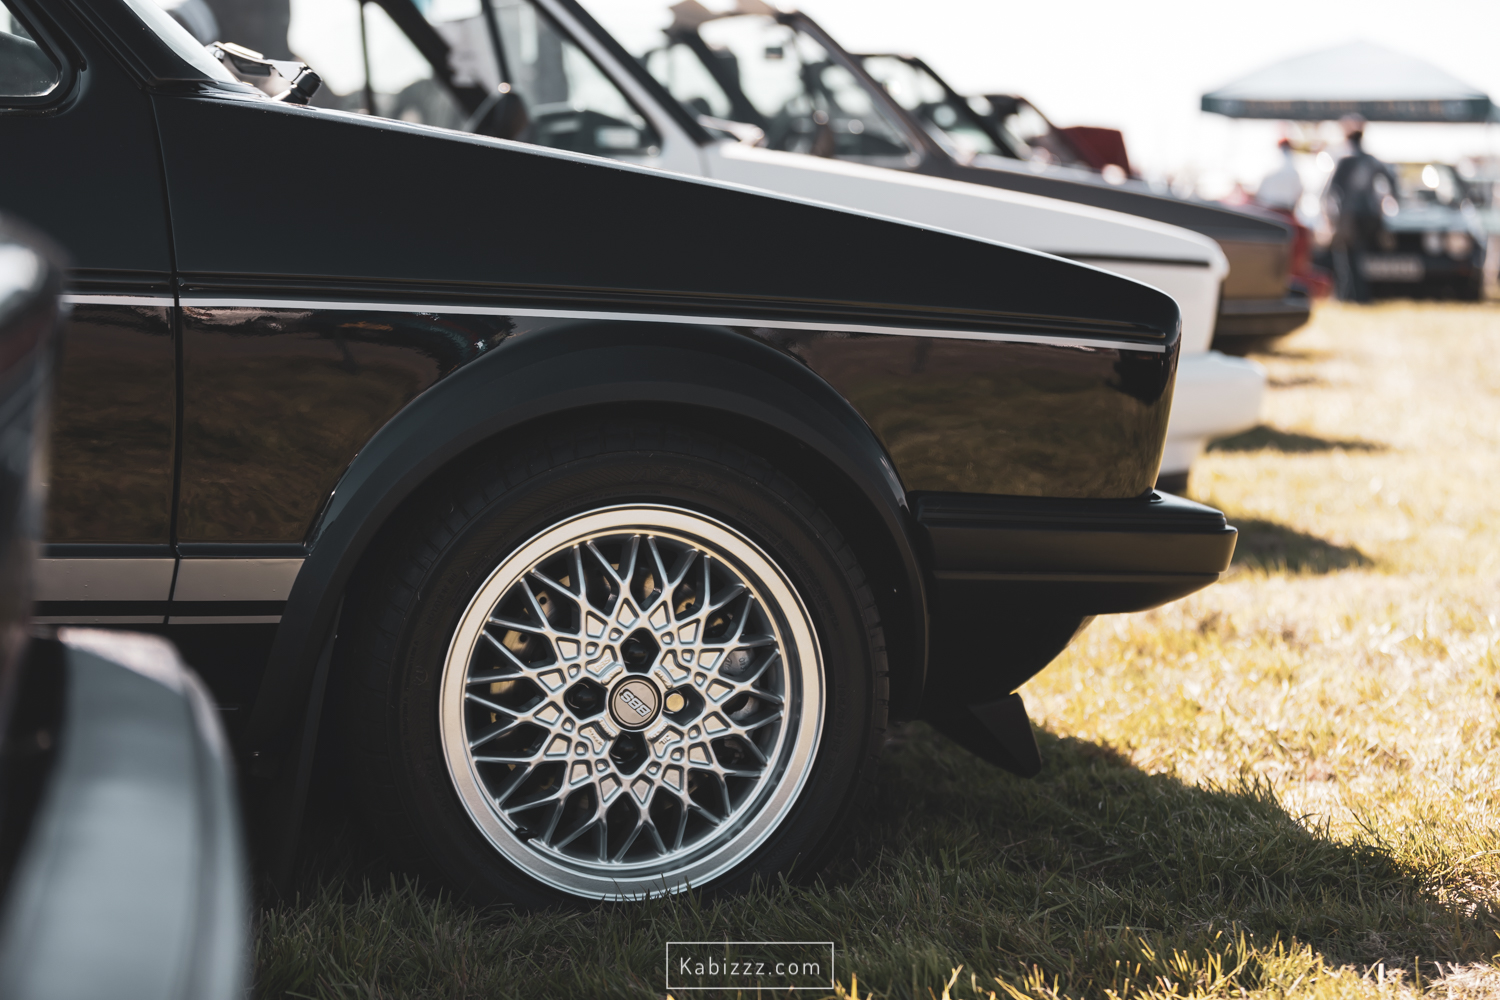 Kabizzz_Photography_Stirling_District_Classic _cars-46.jpg